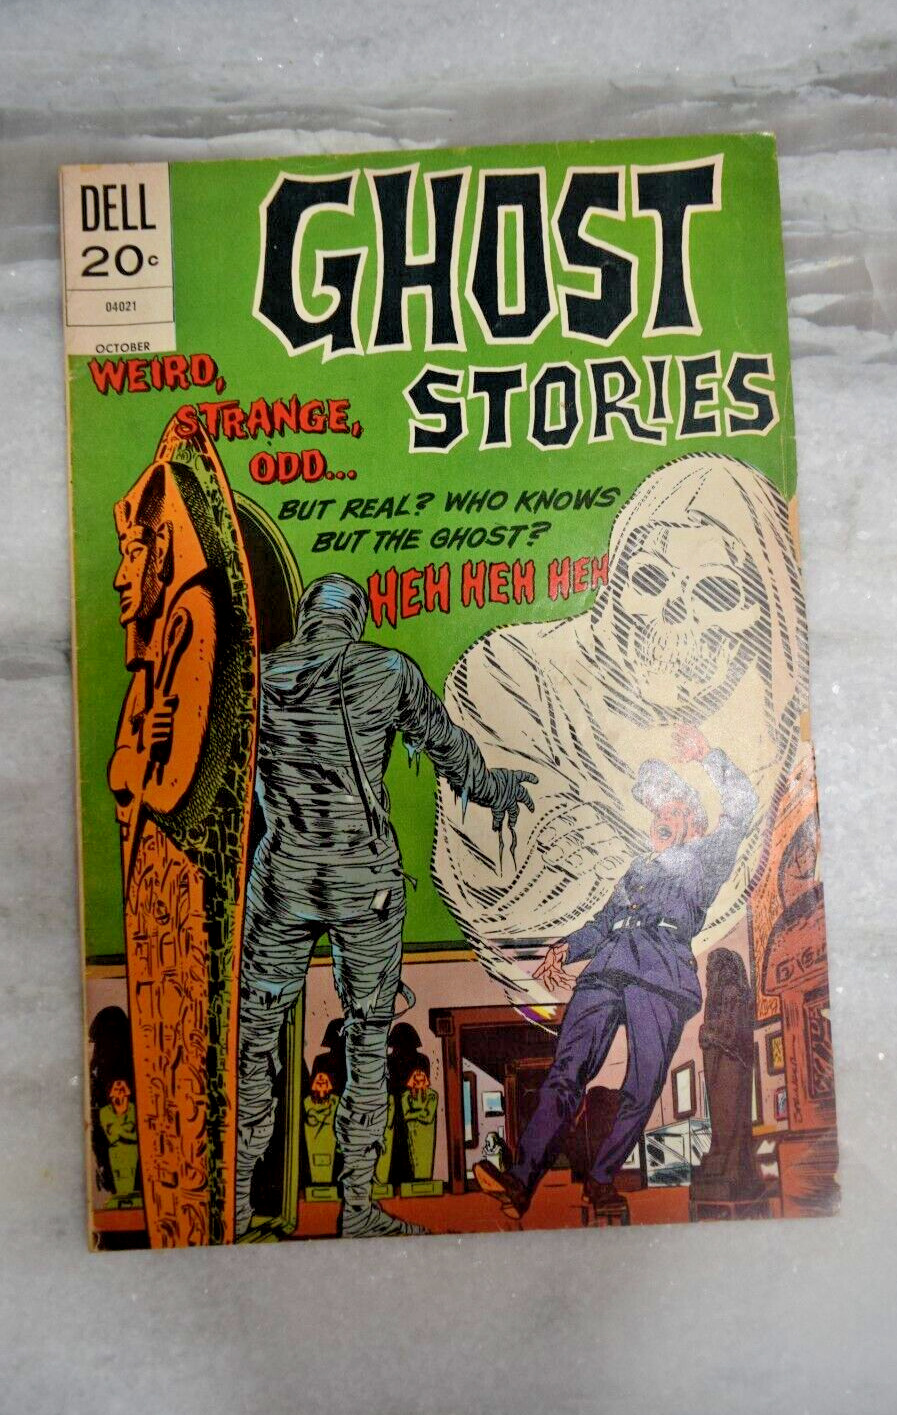 GHOST STORIES #37 VG+ last issue dell comic October